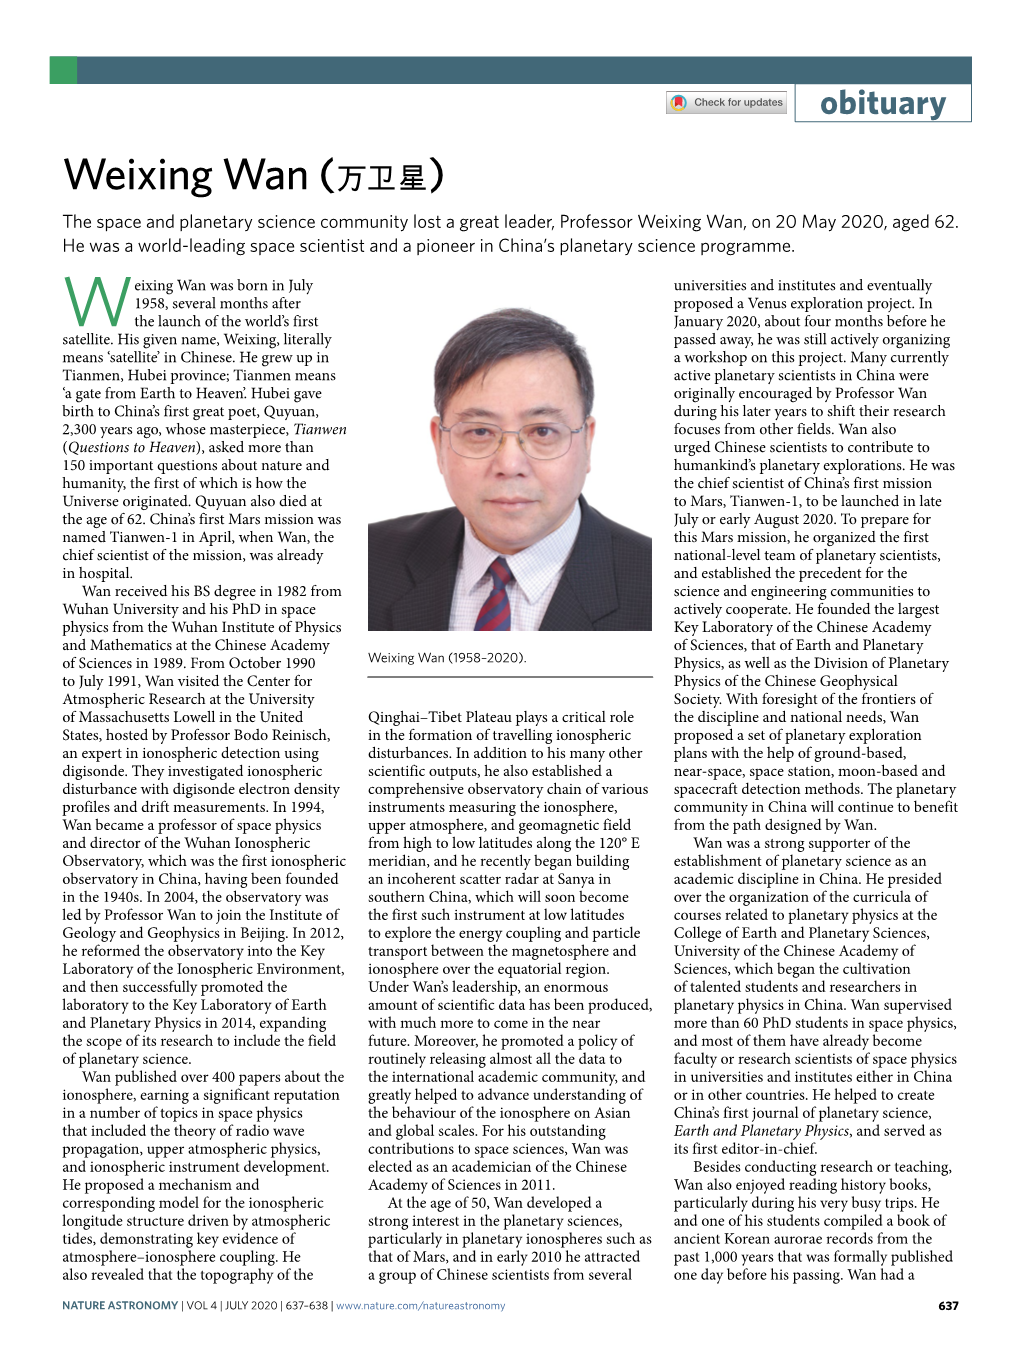 Weixing Wan (万卫星) the Space and Planetary Science Community Lost a Great Leader, Professor Weixing Wan, on 20 May 2020, Aged 62